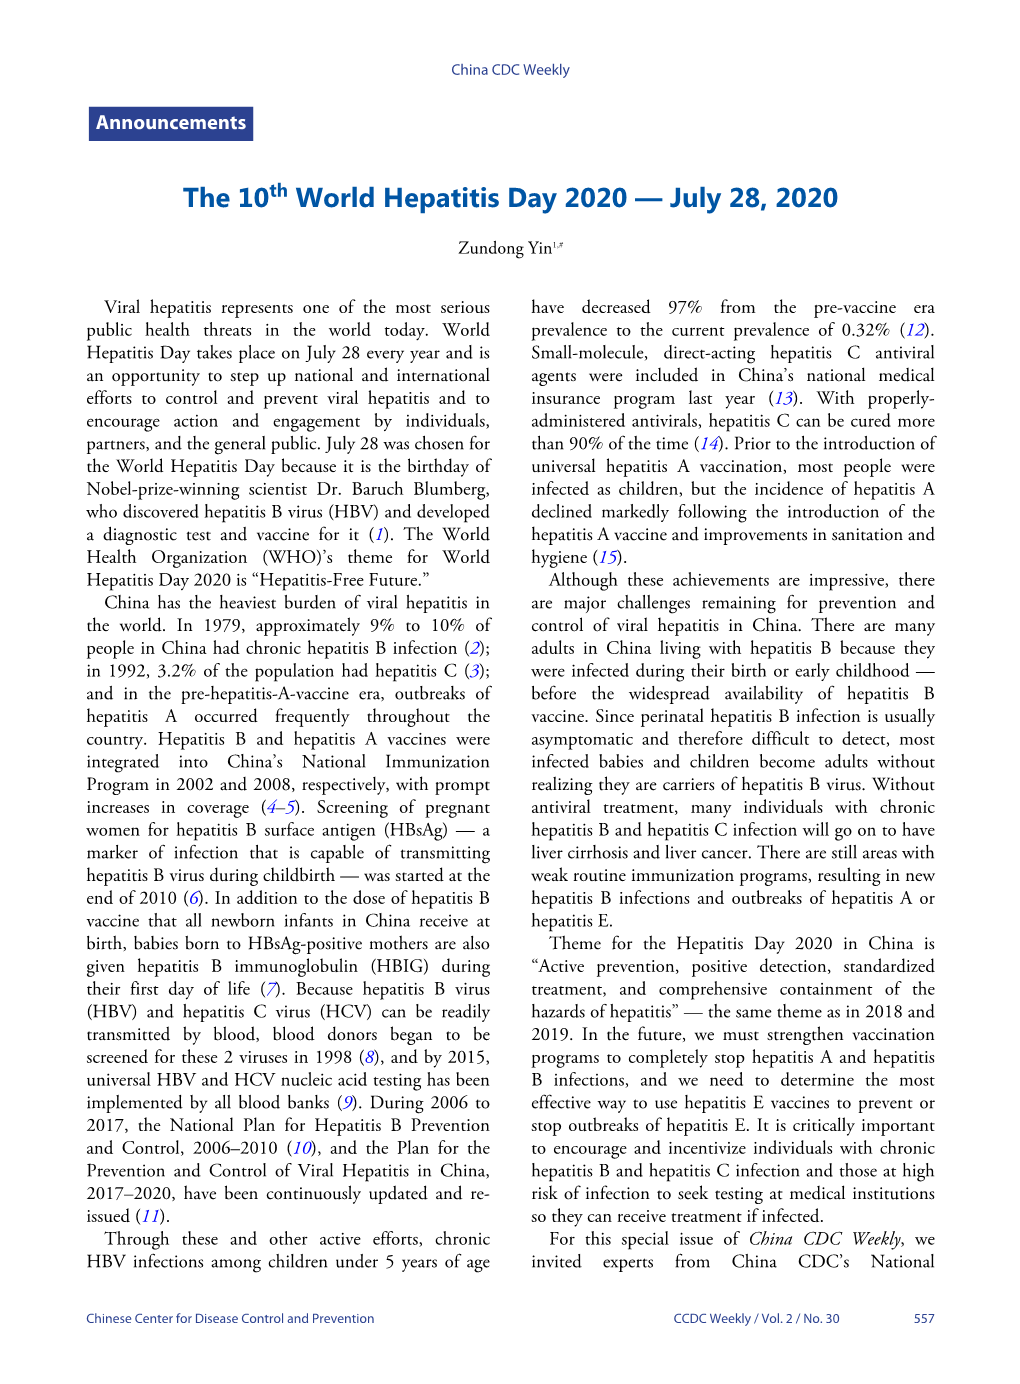 The 10Th World Hepatitis Day 2020 — July 28, 2020